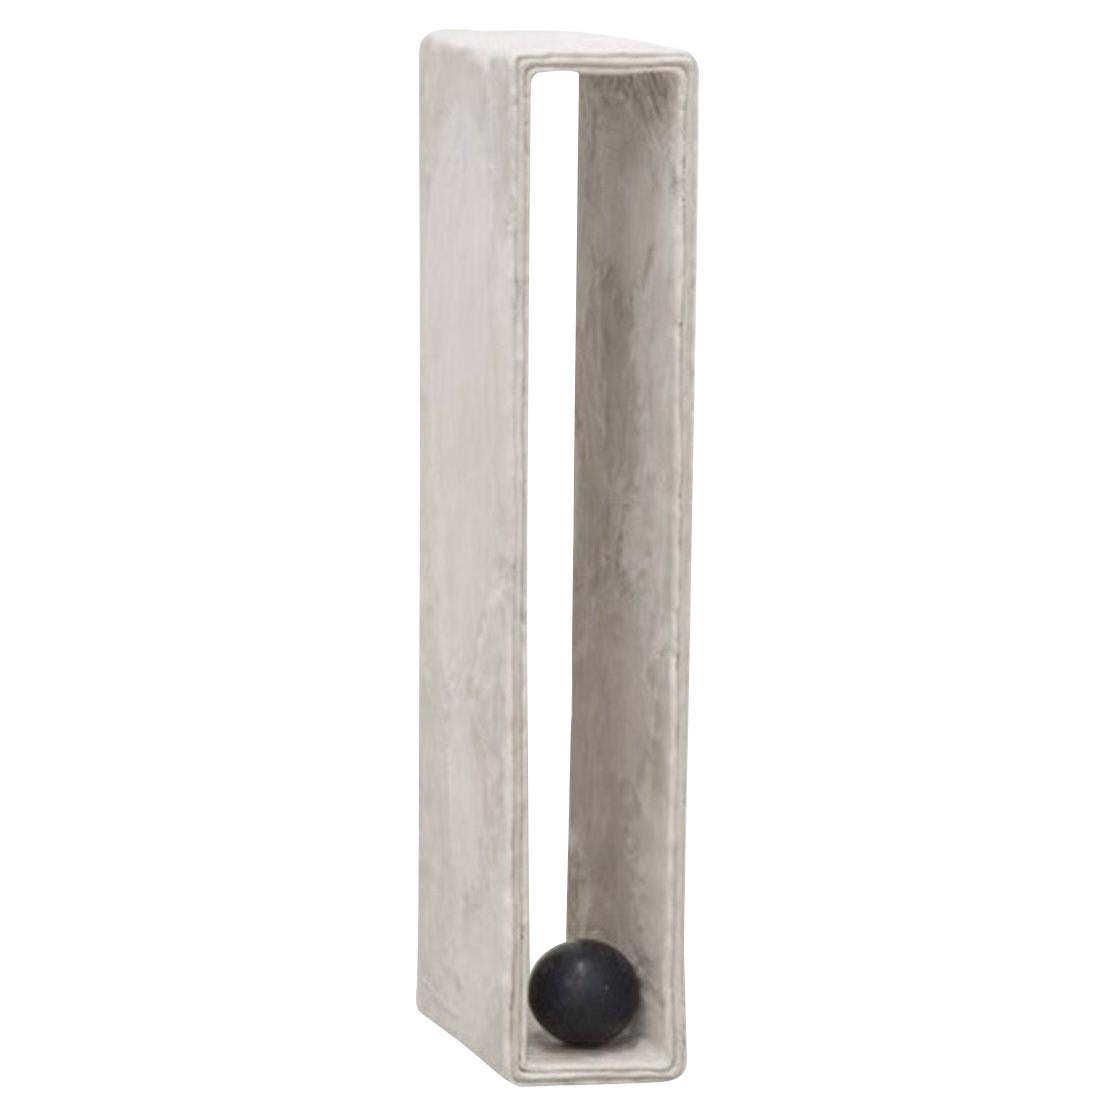 Plane Concrete Pedestal by Bailey Fontaine, REP by Tuleste Factory